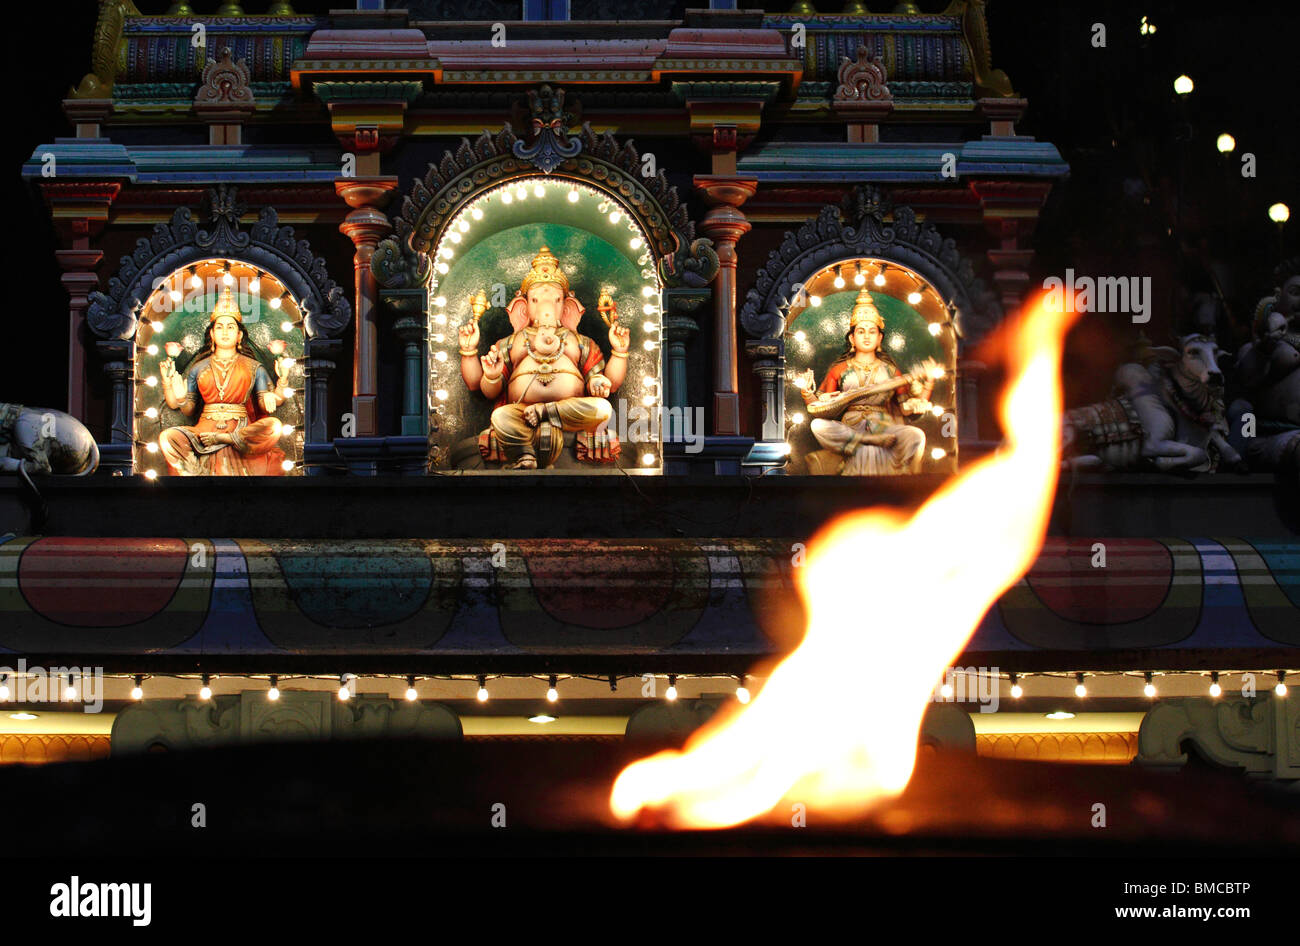 A puja flame in front of the entrance of a Hindu temple at Batu Caves, Malaysia Stock Photo